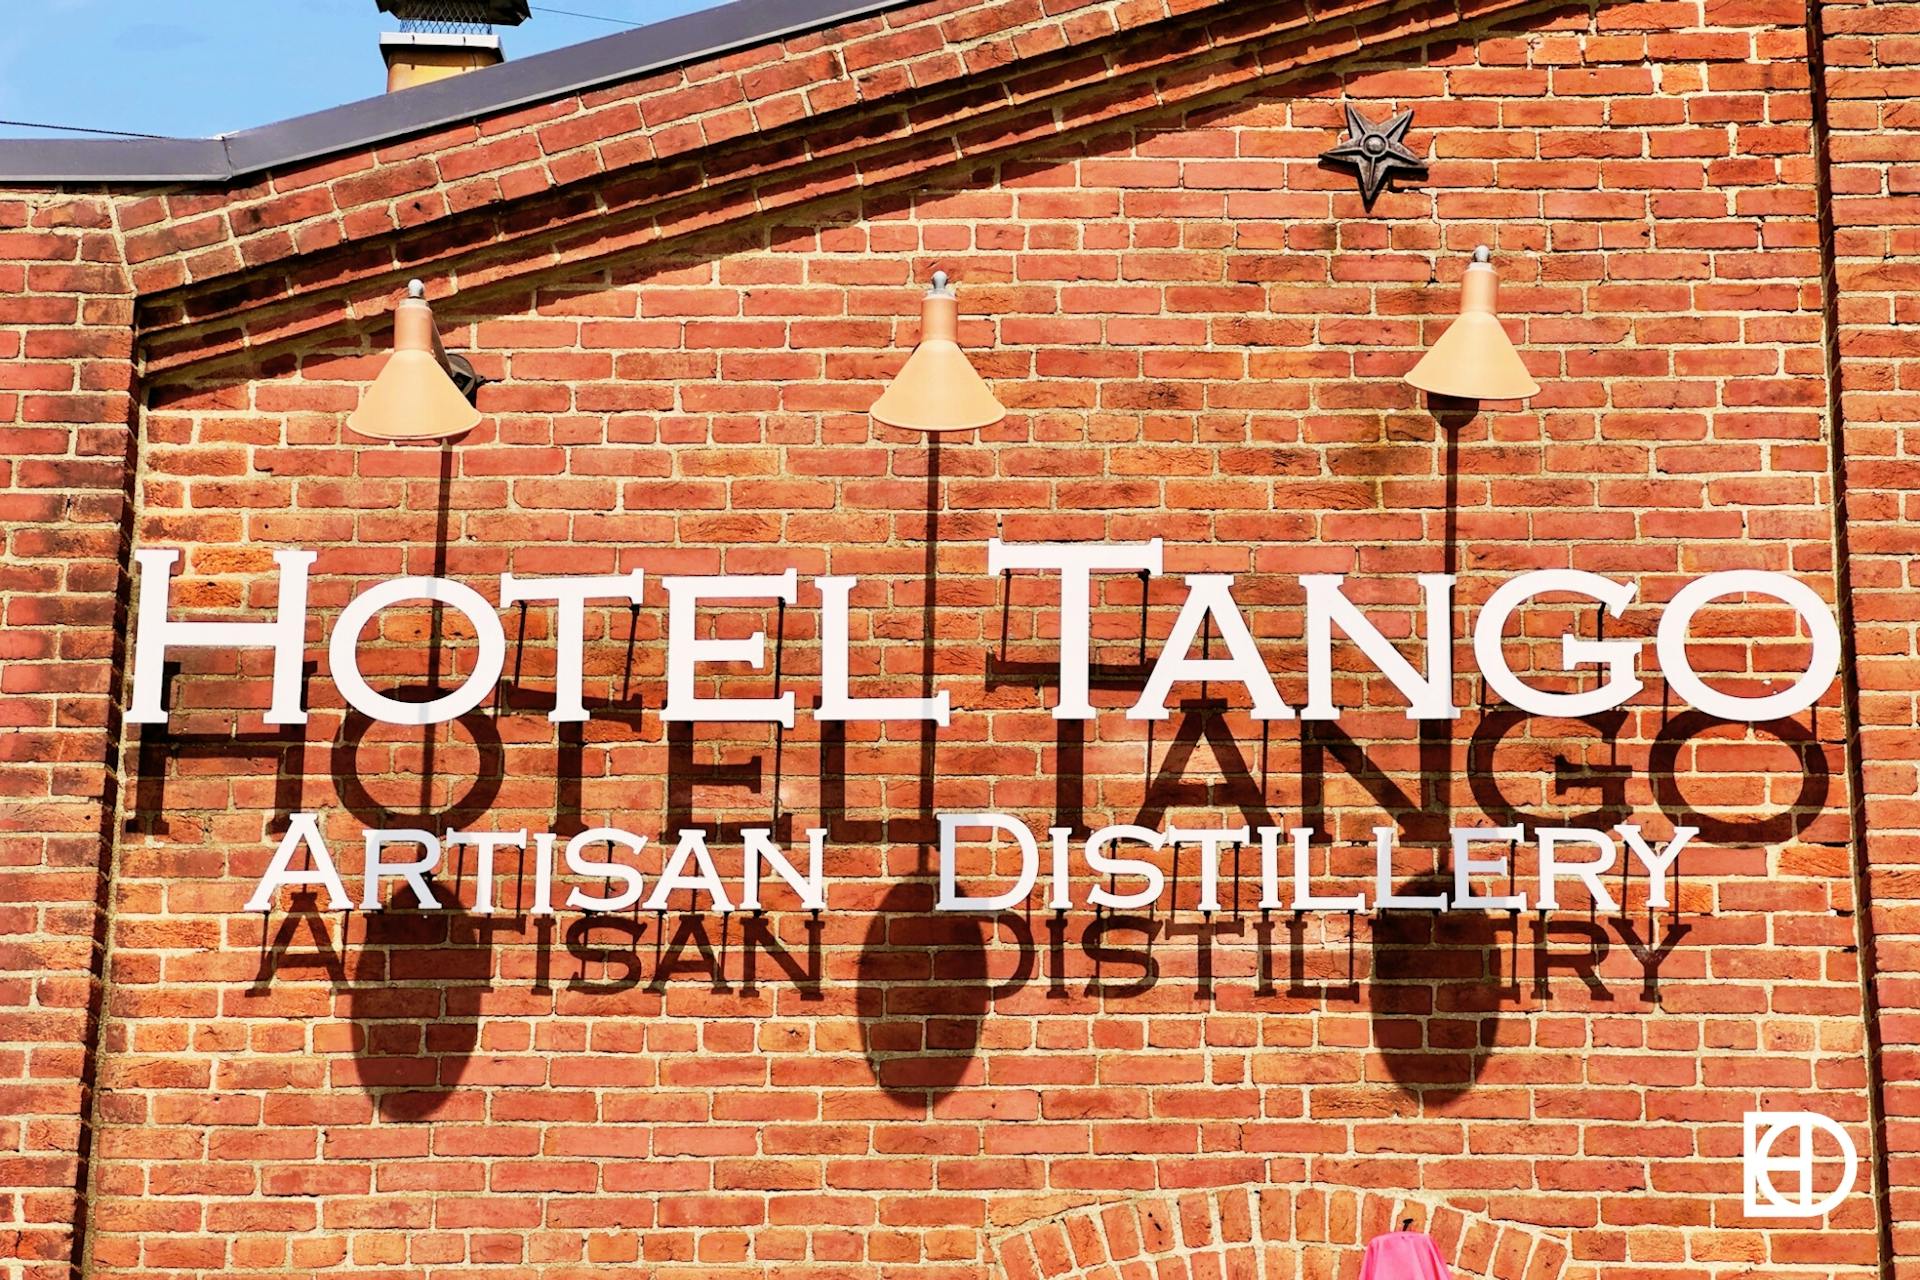 Exterior photo of Hotel Tango Distillery, showing signage